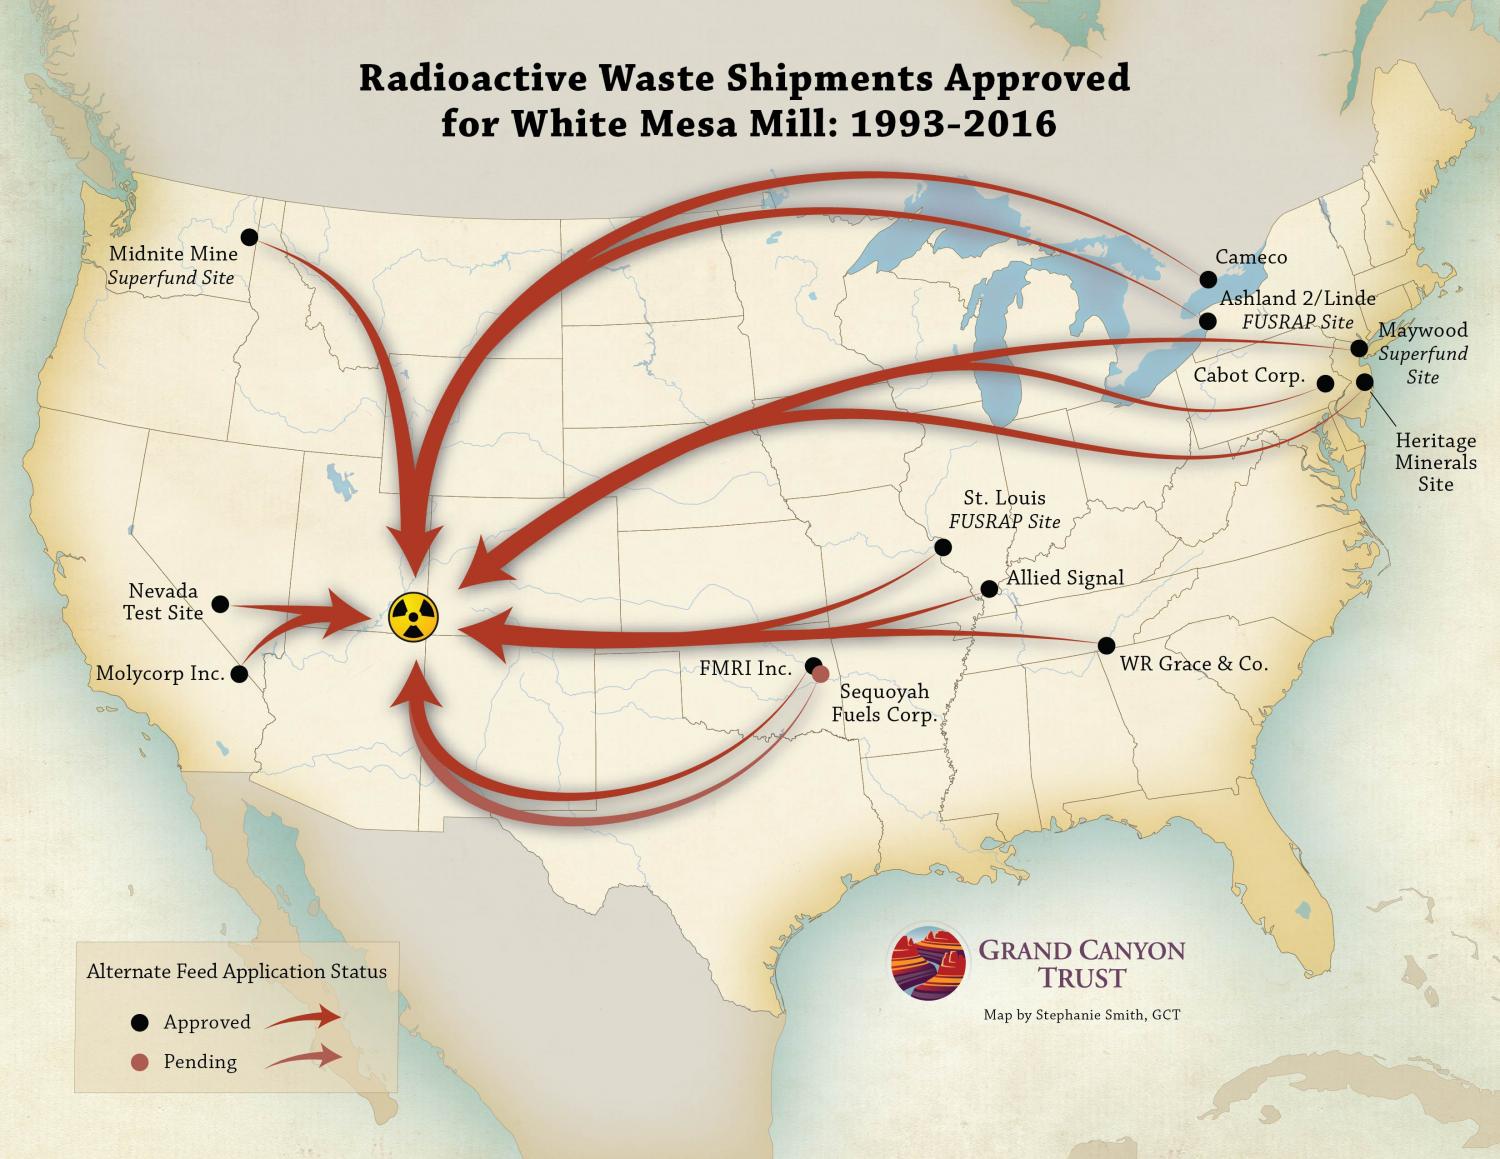 Map of Radioactive Waste Shipments Approved for White Mesa Mill